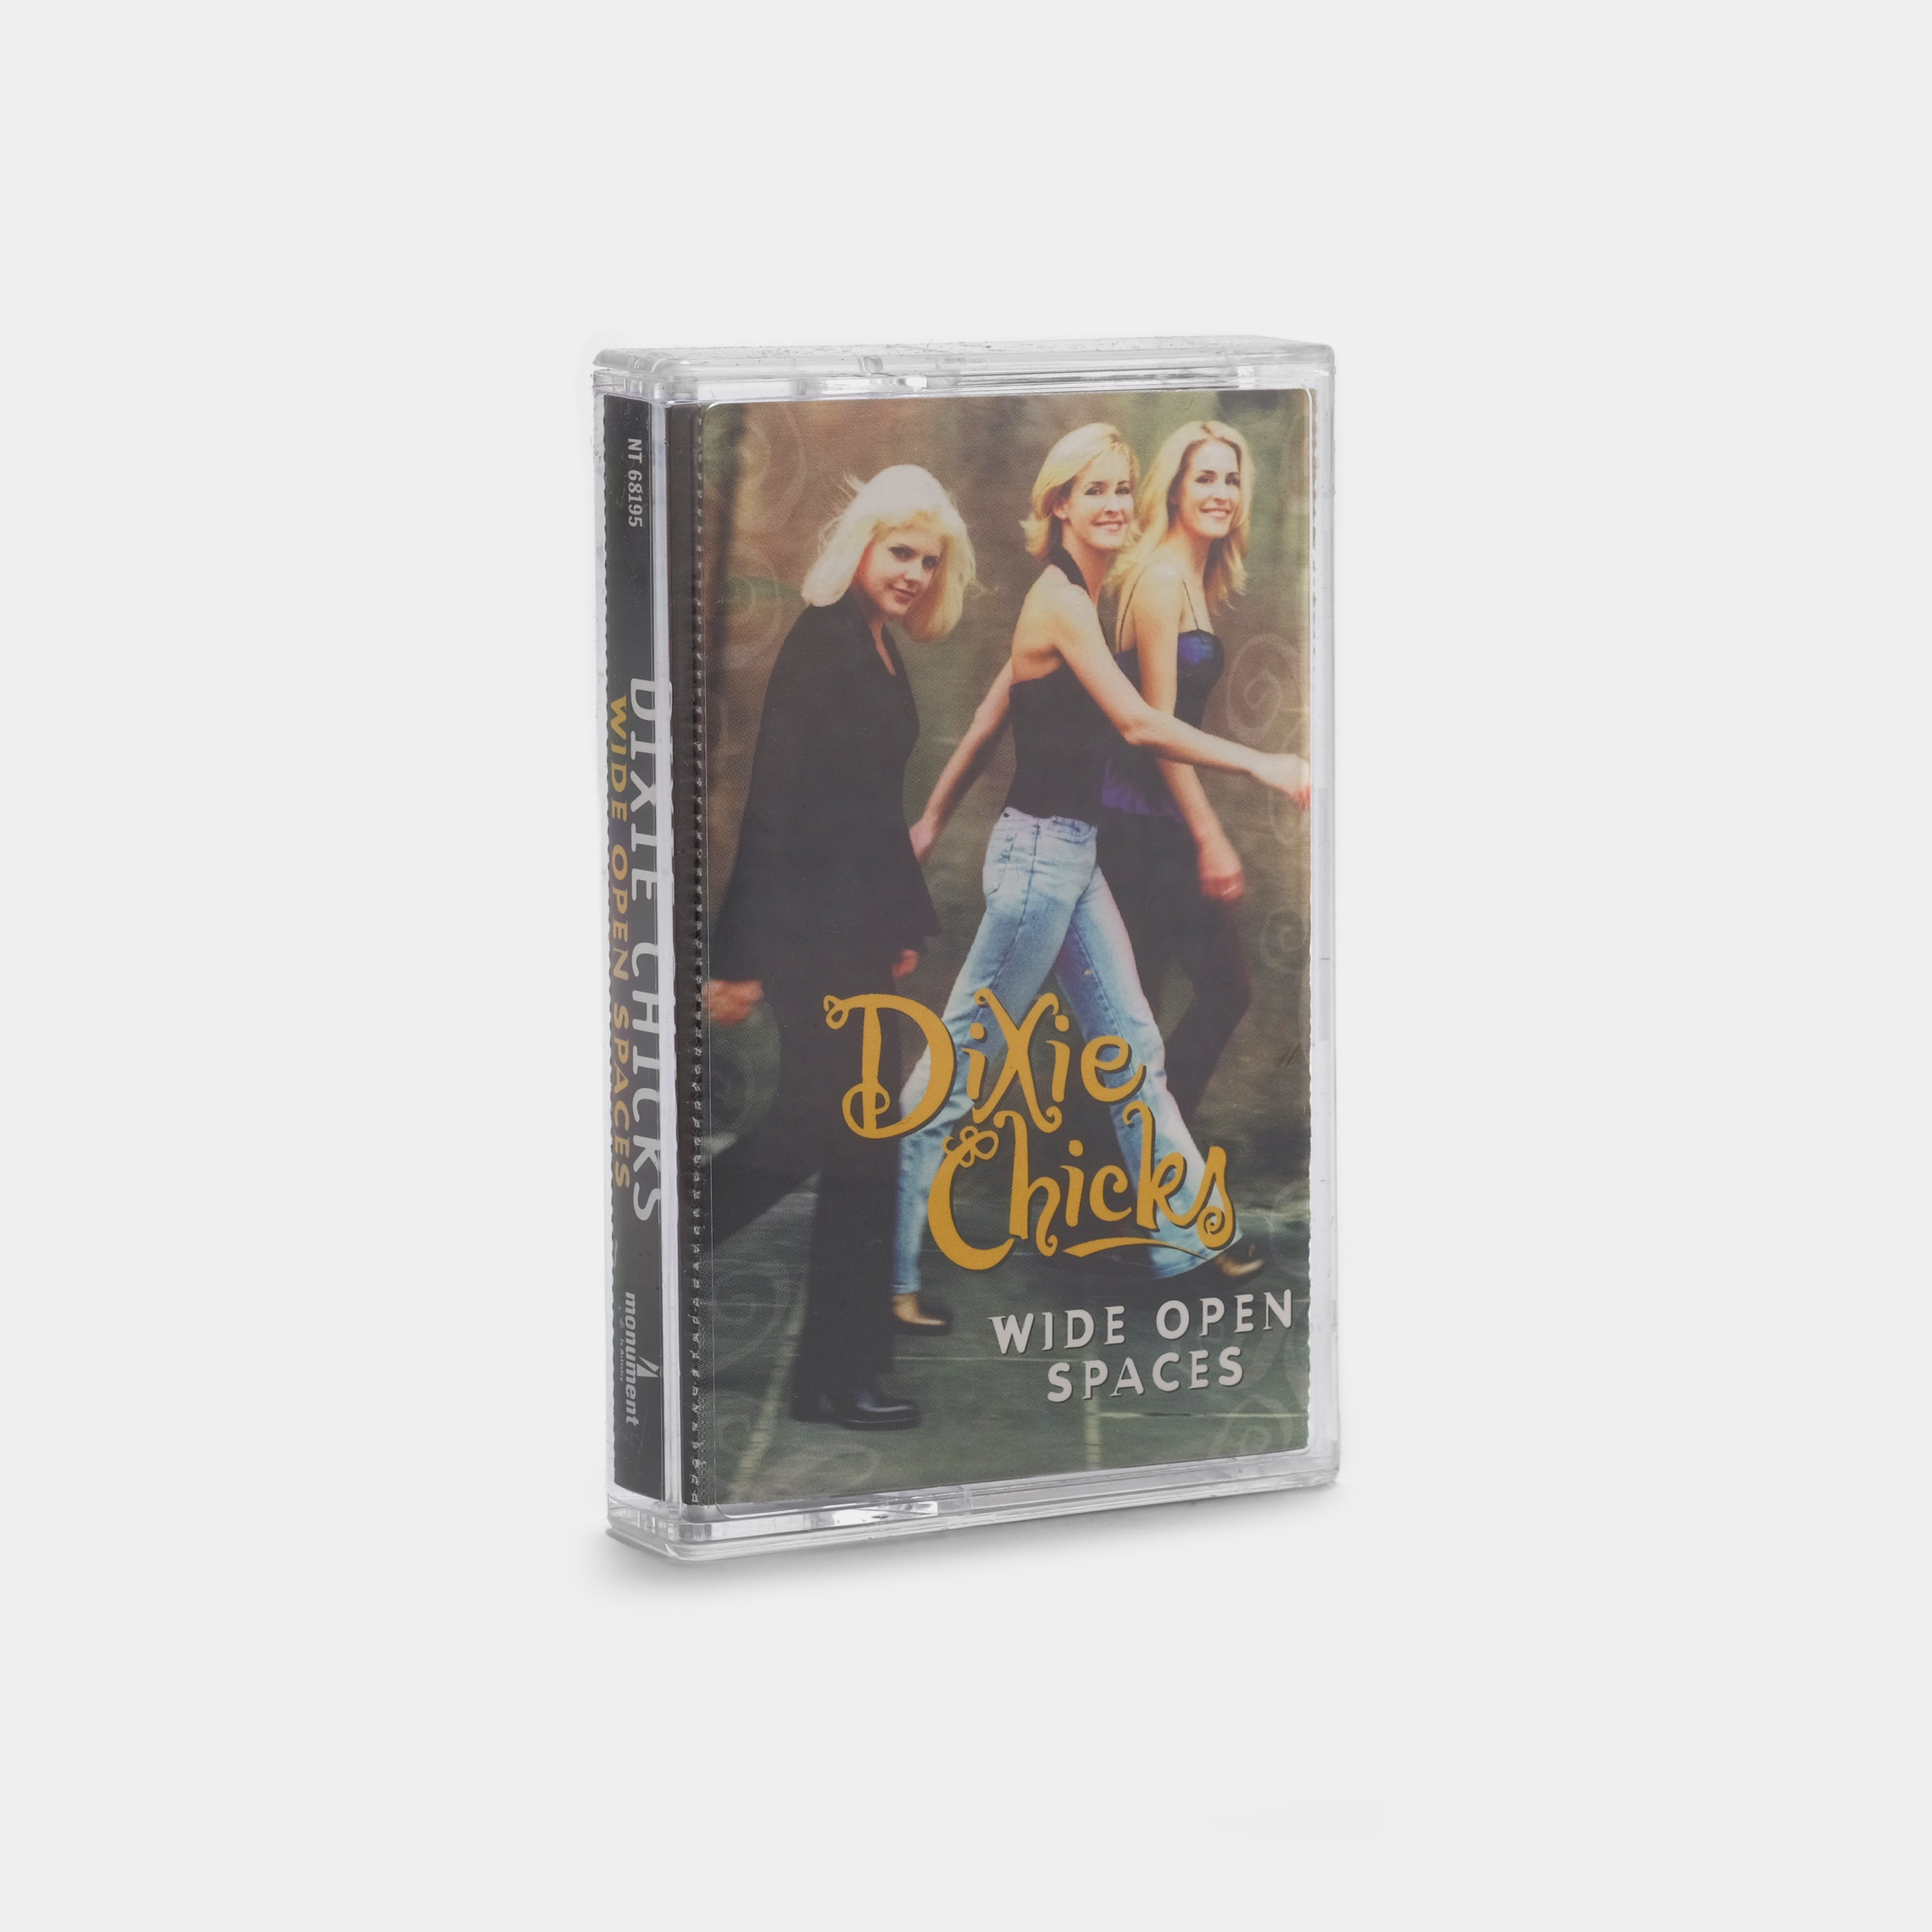 The Dixie Chicks - Wide Open Spaces Cassette Tape